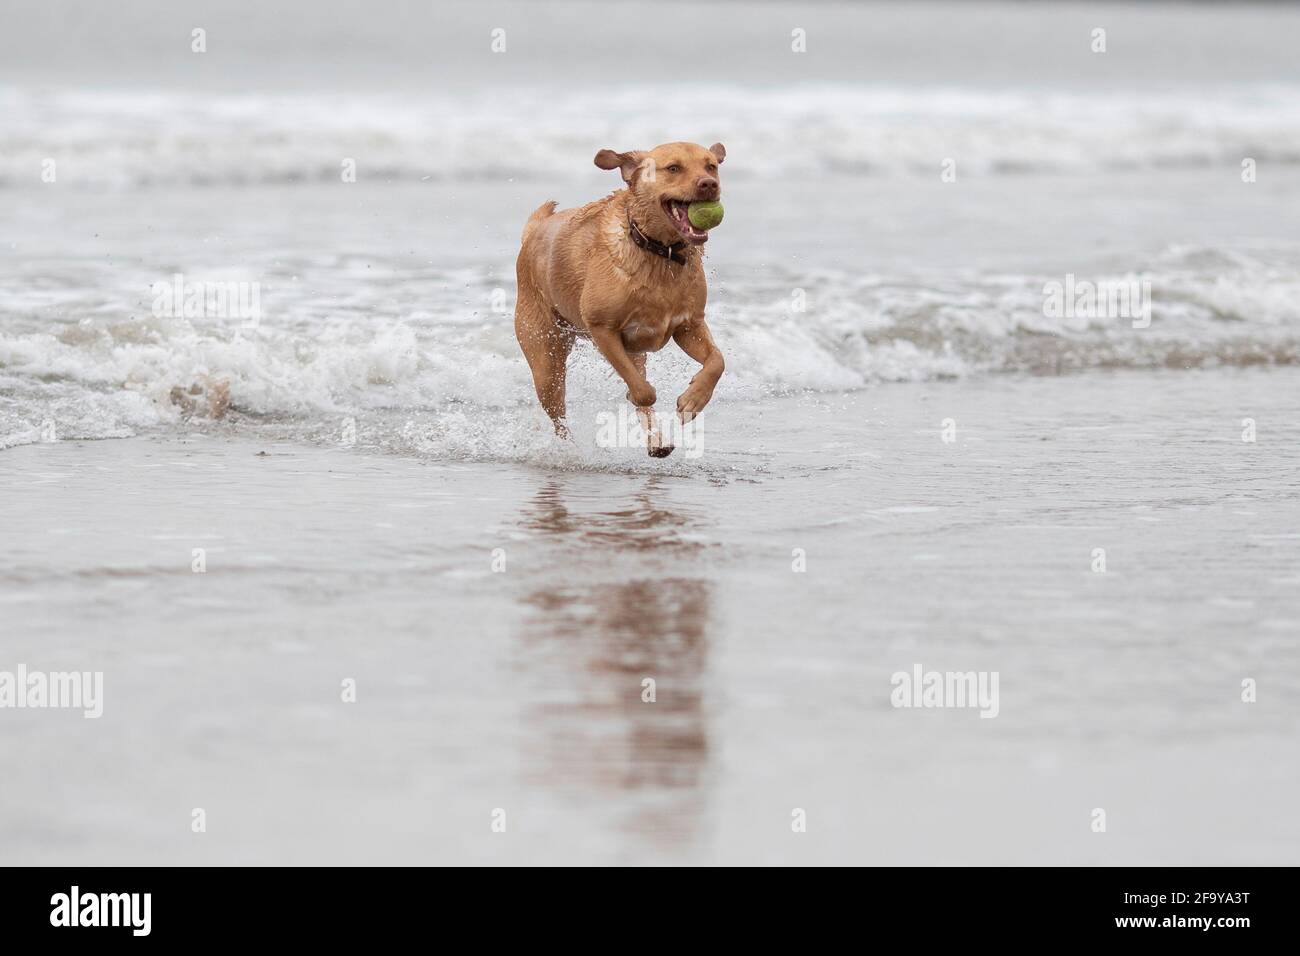 Cardiff, Wales, UK. 21st Apr, 2021. Talisker emerges from an early morning dip in the sea at Watch House Bay near Barry Island as Wales and much of the UK continues to enjoy settled spring weather. Credit: Mark Hawkins/Alamy Live News Stock Photo